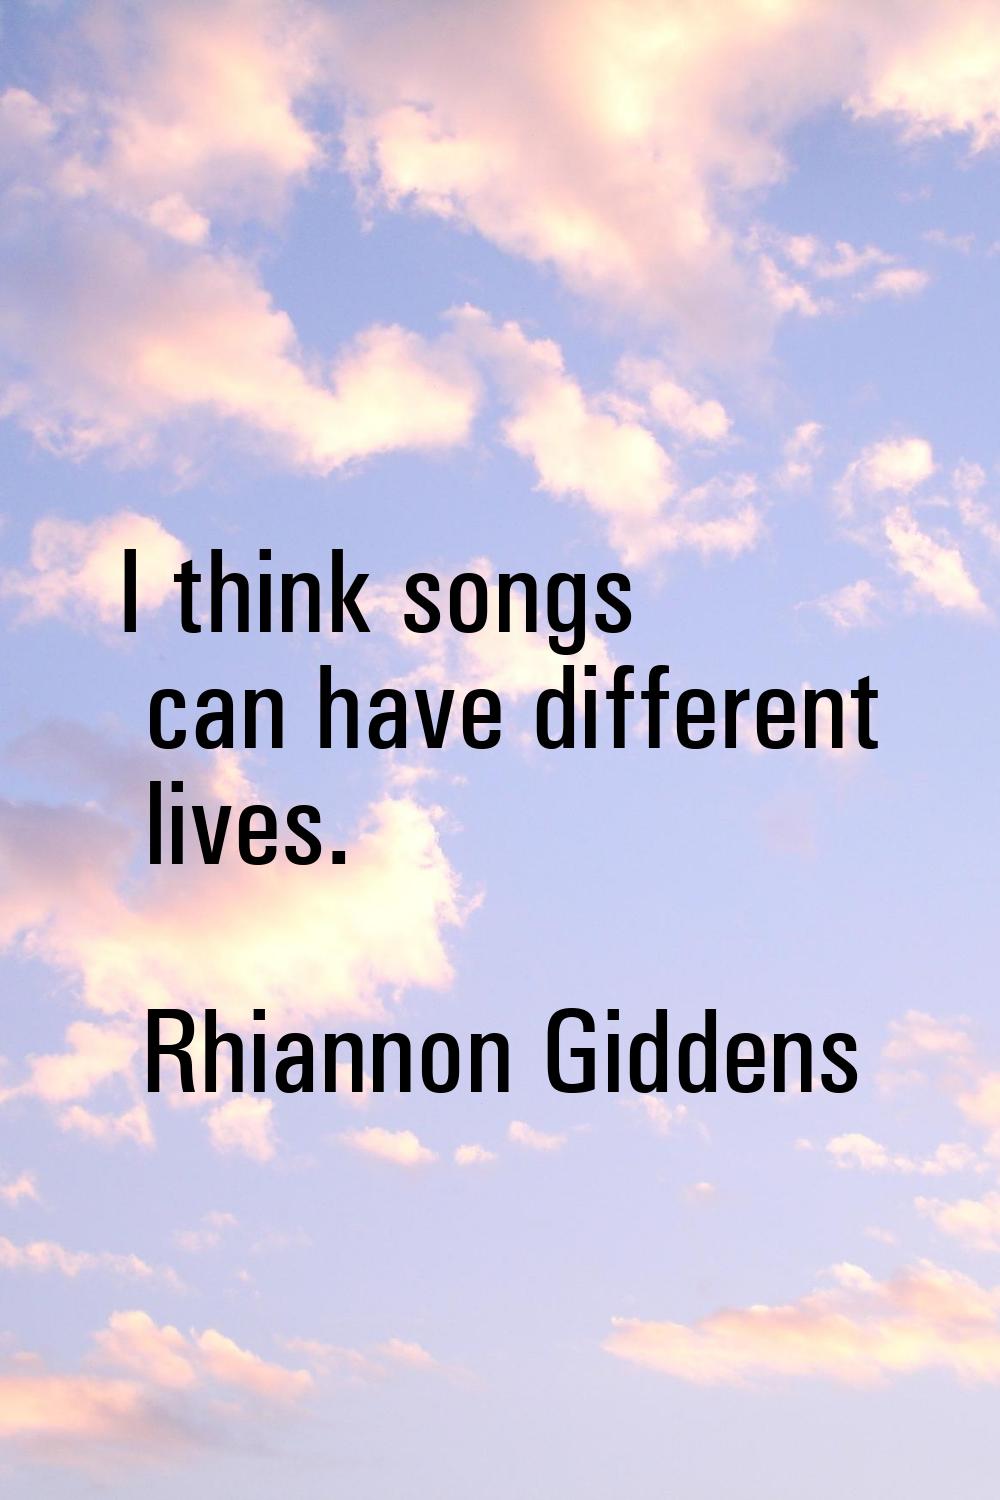 I think songs can have different lives.